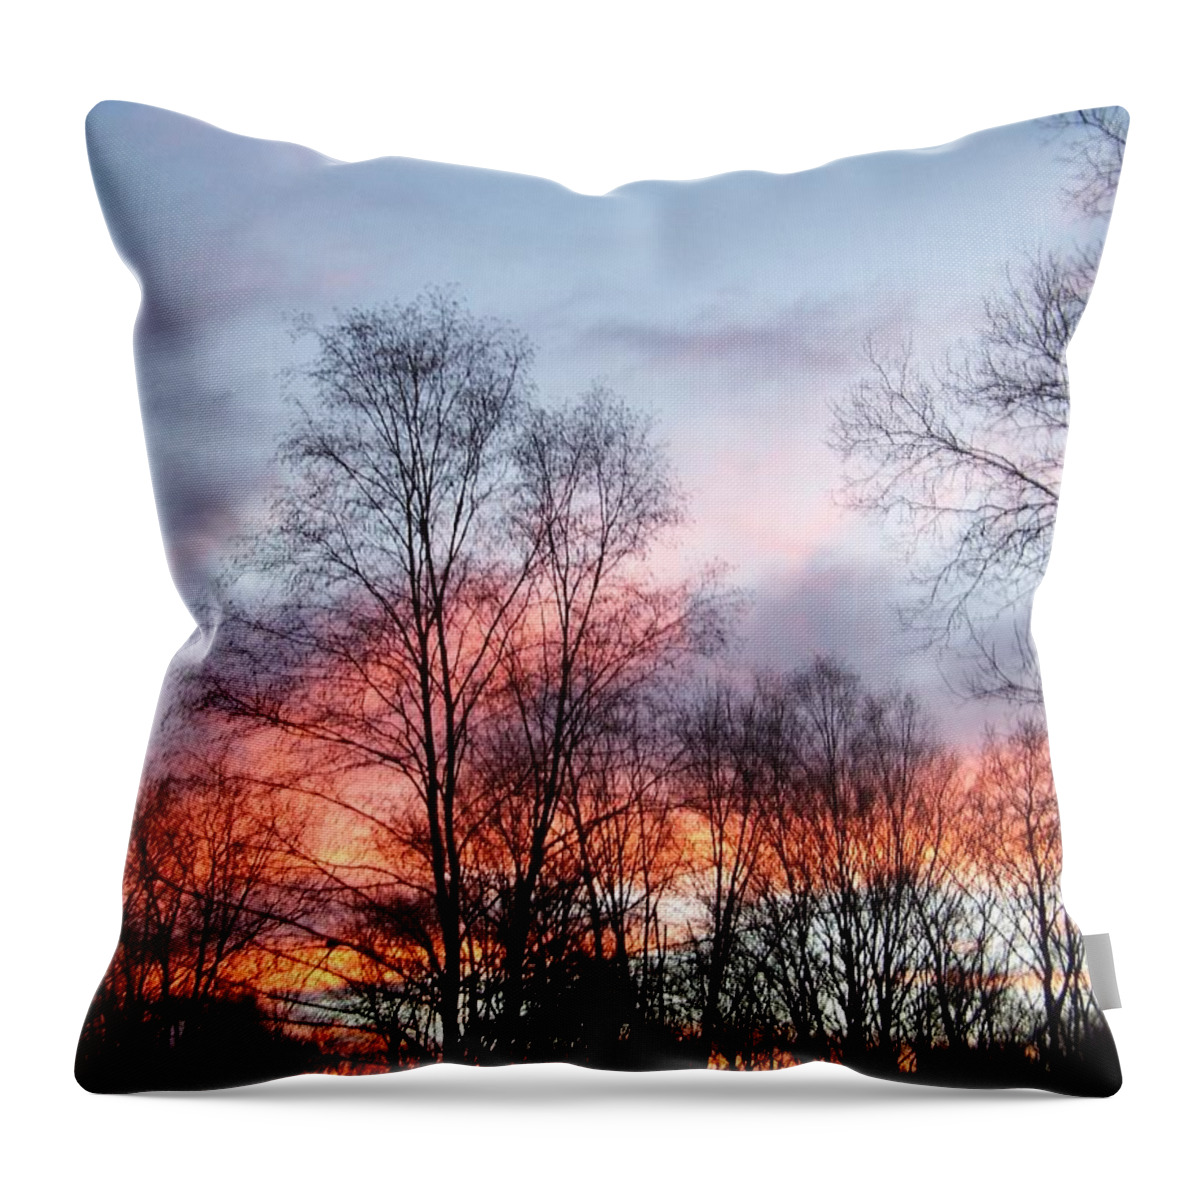 Sunset Throw Pillow featuring the photograph Colors Of Sunset by Kim Galluzzo Wozniak